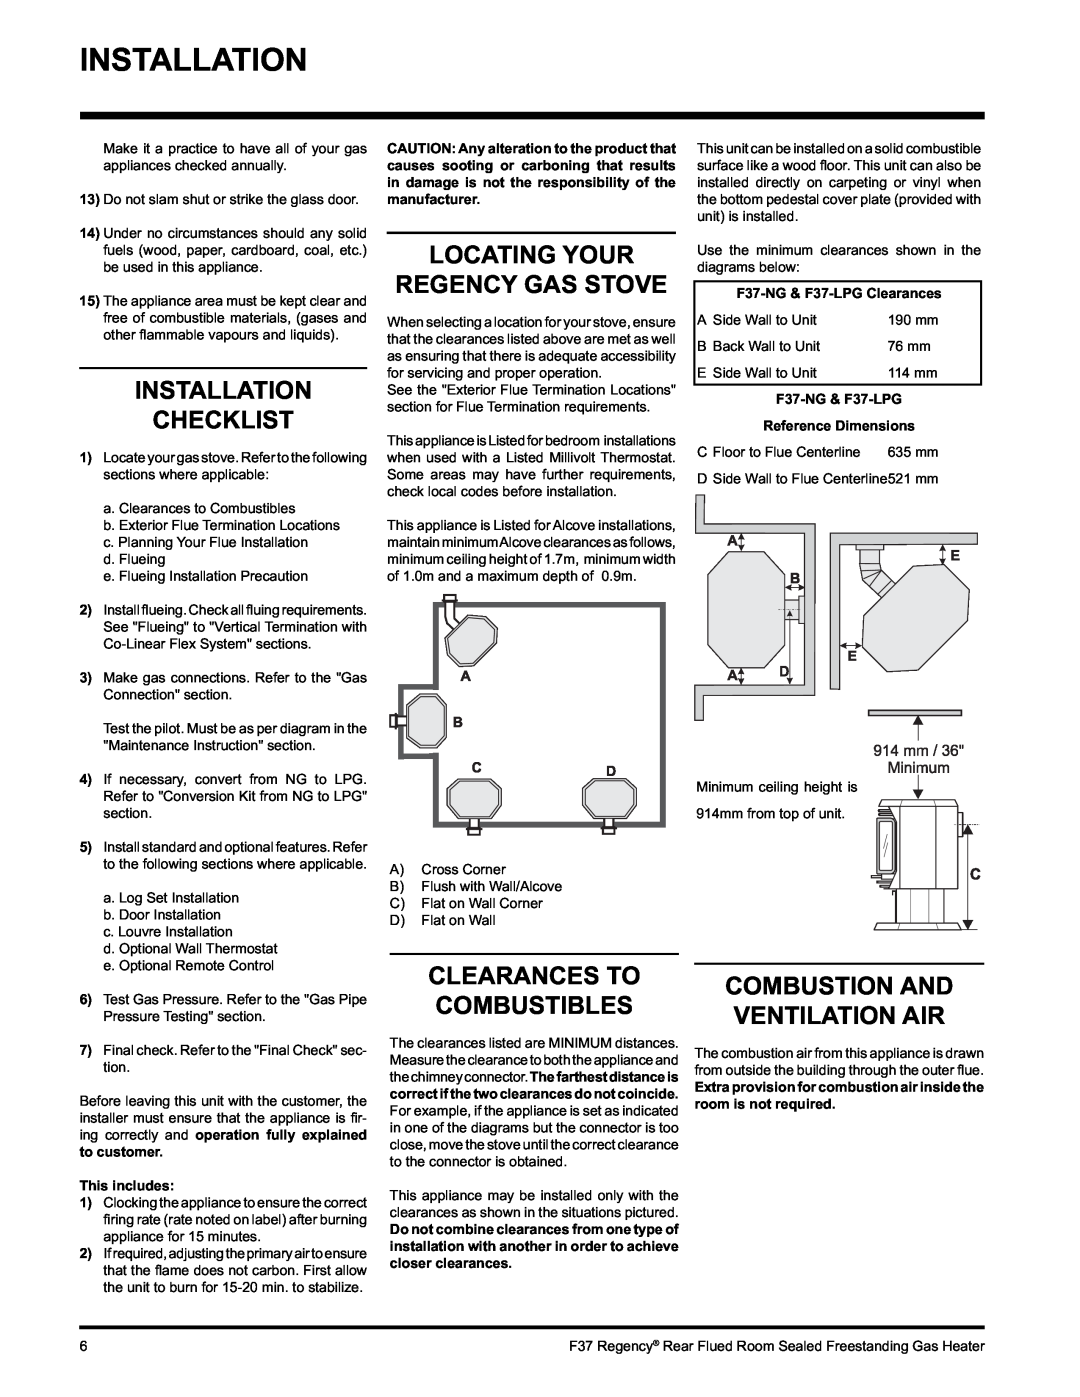 Regency F37-NG, F37-LPG Installation Checklist, Locating Your Regency Gas Stove, Clearances To Combustibles 